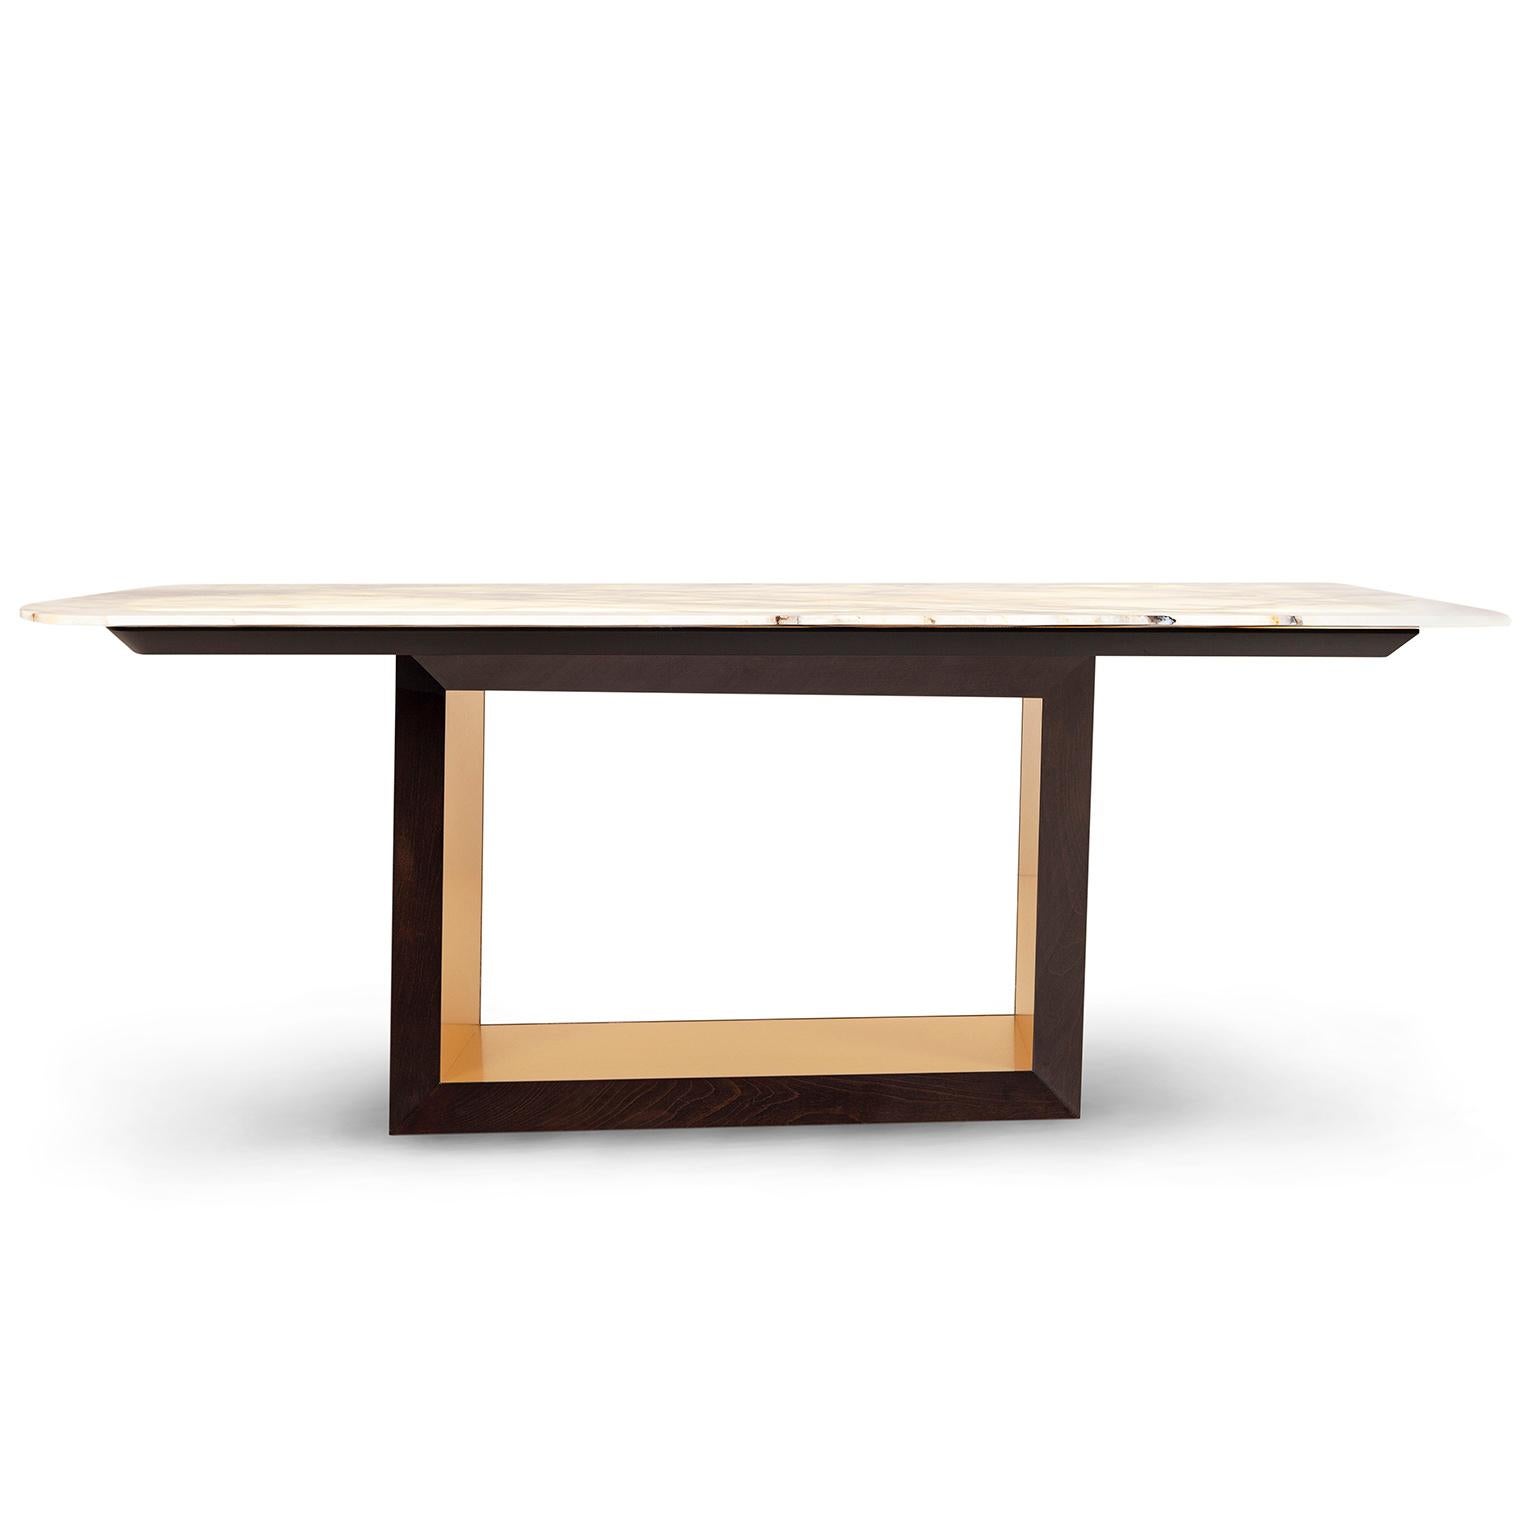 Portuguese Modern Olisippo Dining Table, Patagonia Stone, Handmade Portugal by Greenapple For Sale